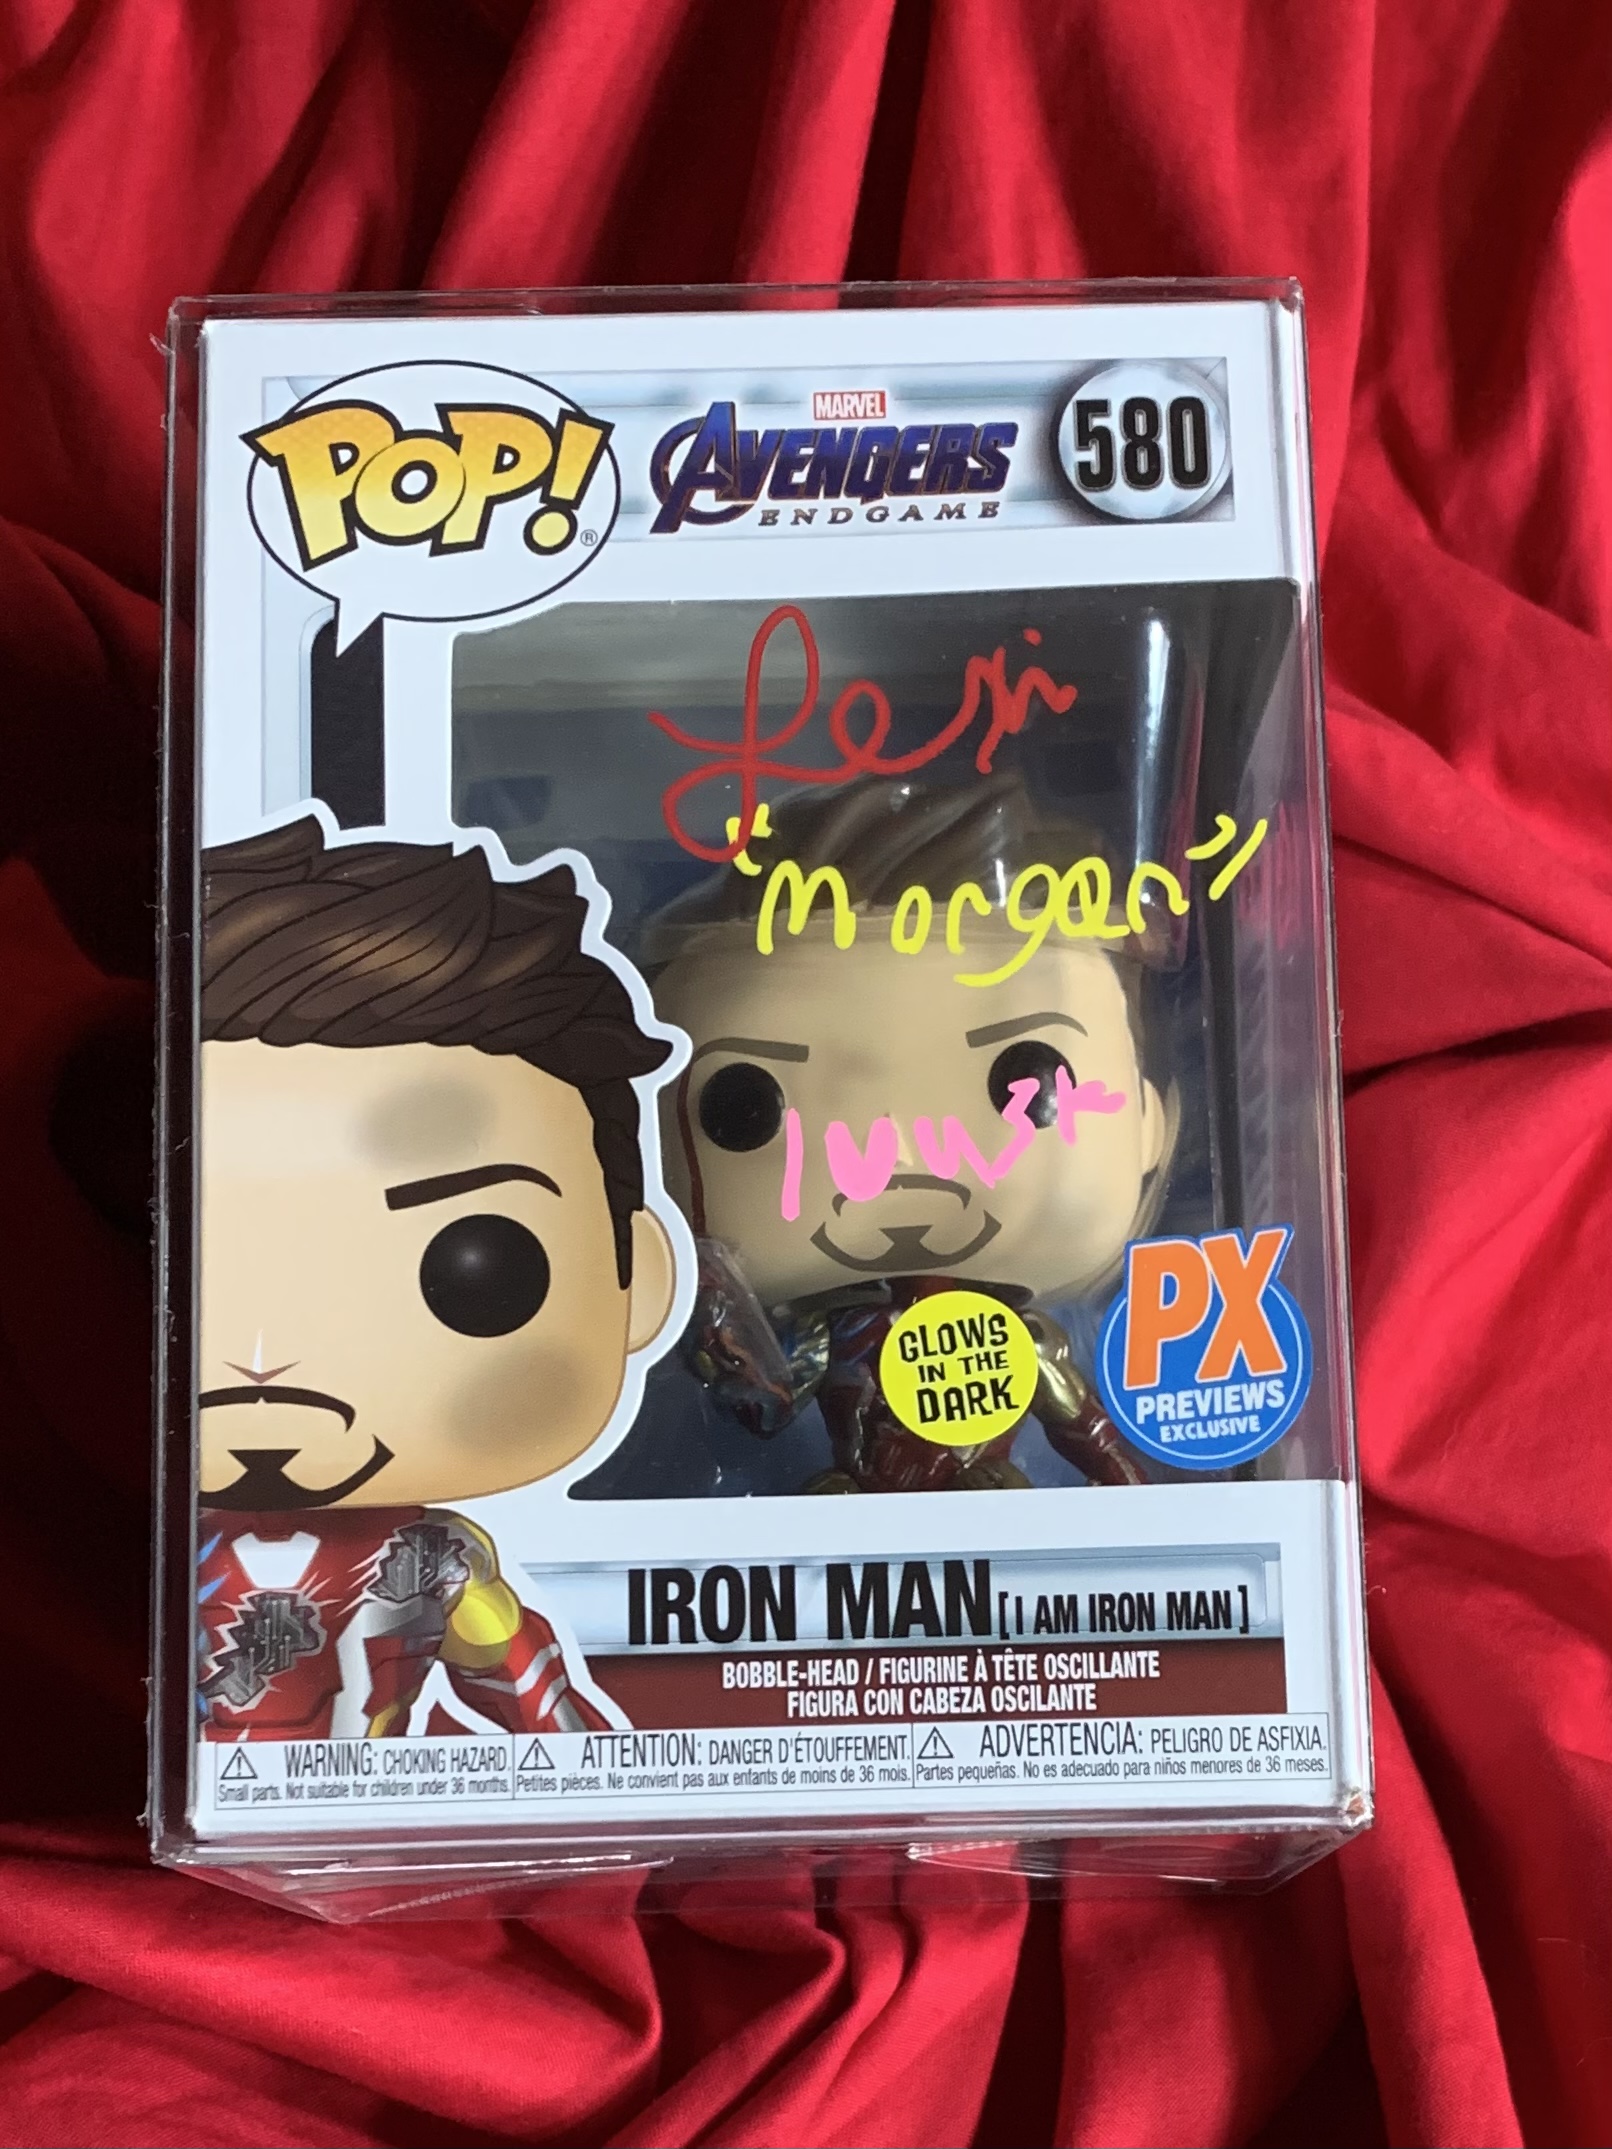 Avengers Endgame~Iron Man (I am Man)~Funko Pop #580 (PX glow in the dark edition)~Signed by Lexi with “Morgan” and quote “I love (heart) you 3k.” Includes JSA COA and USA